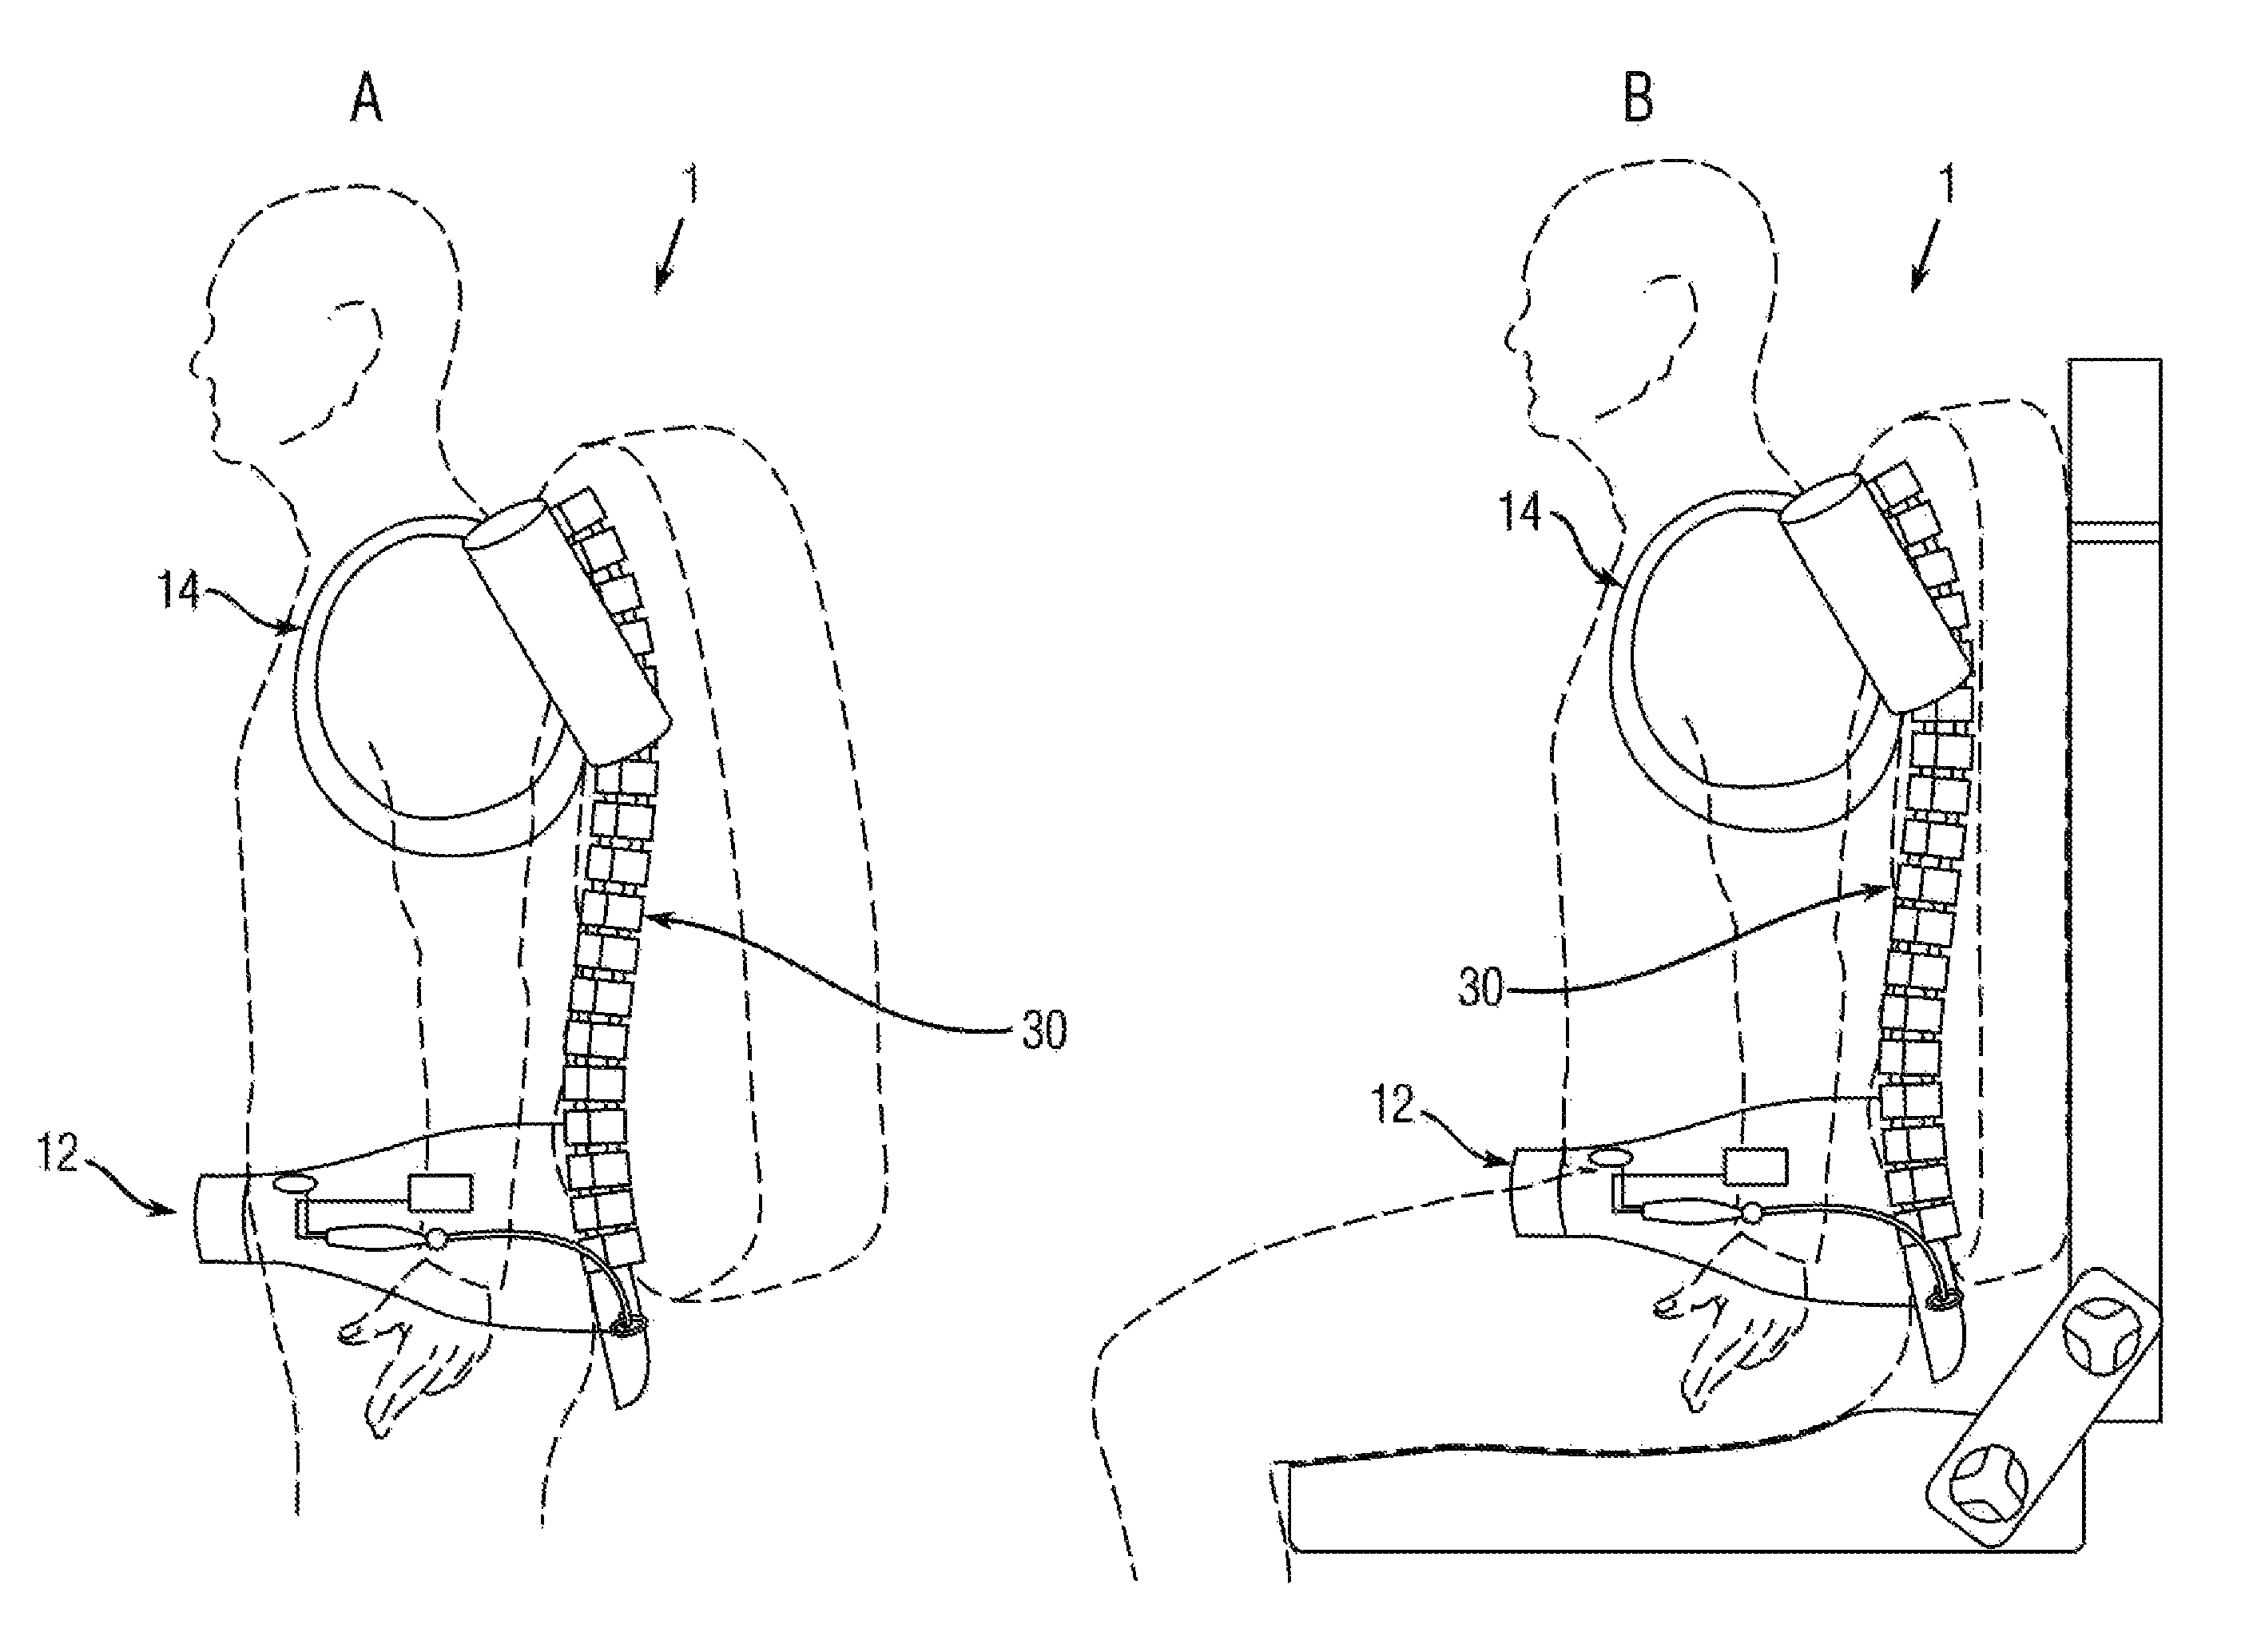 Active spinal support system